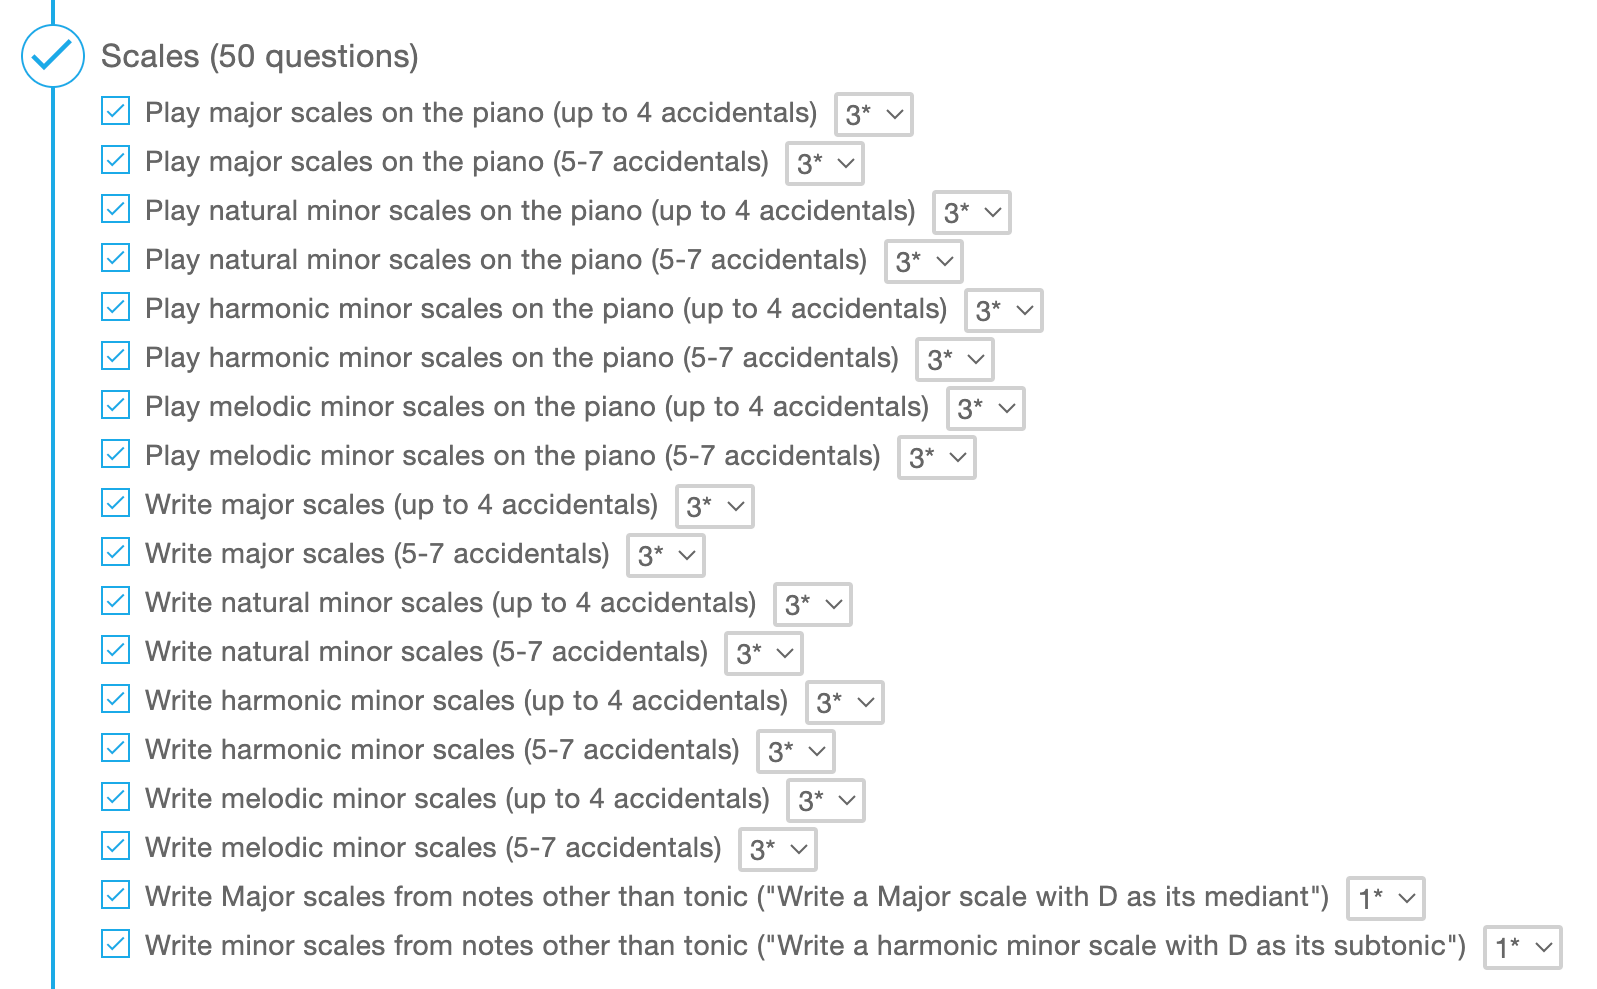 Image showing new question categories for scales test section